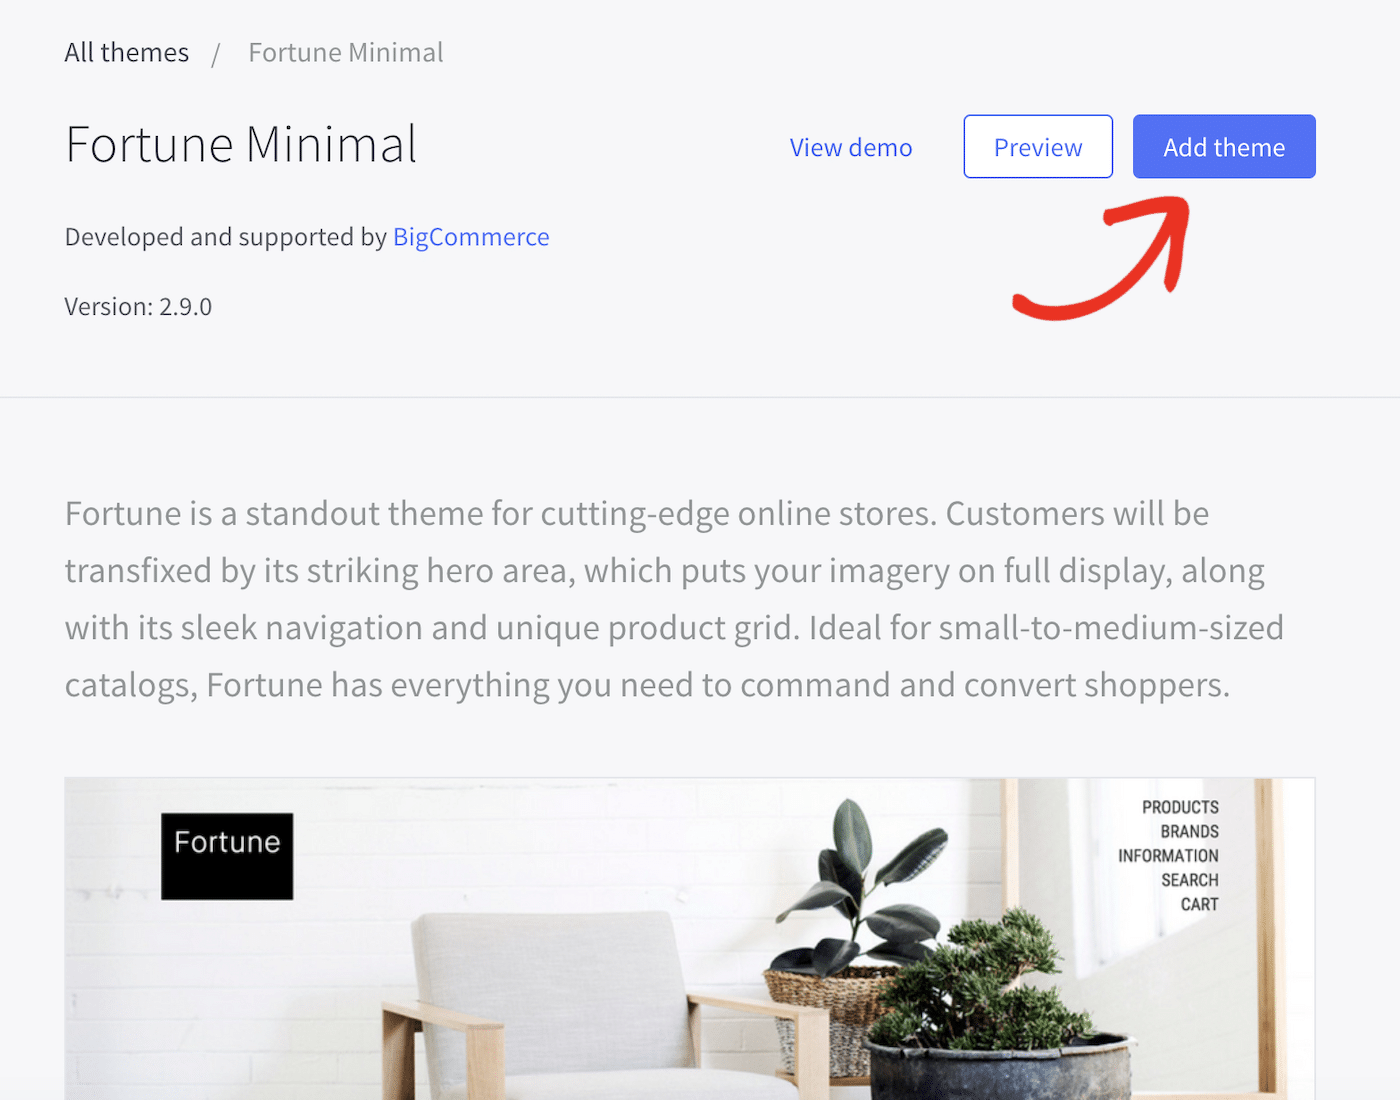 Add theme to BigCommerce Store